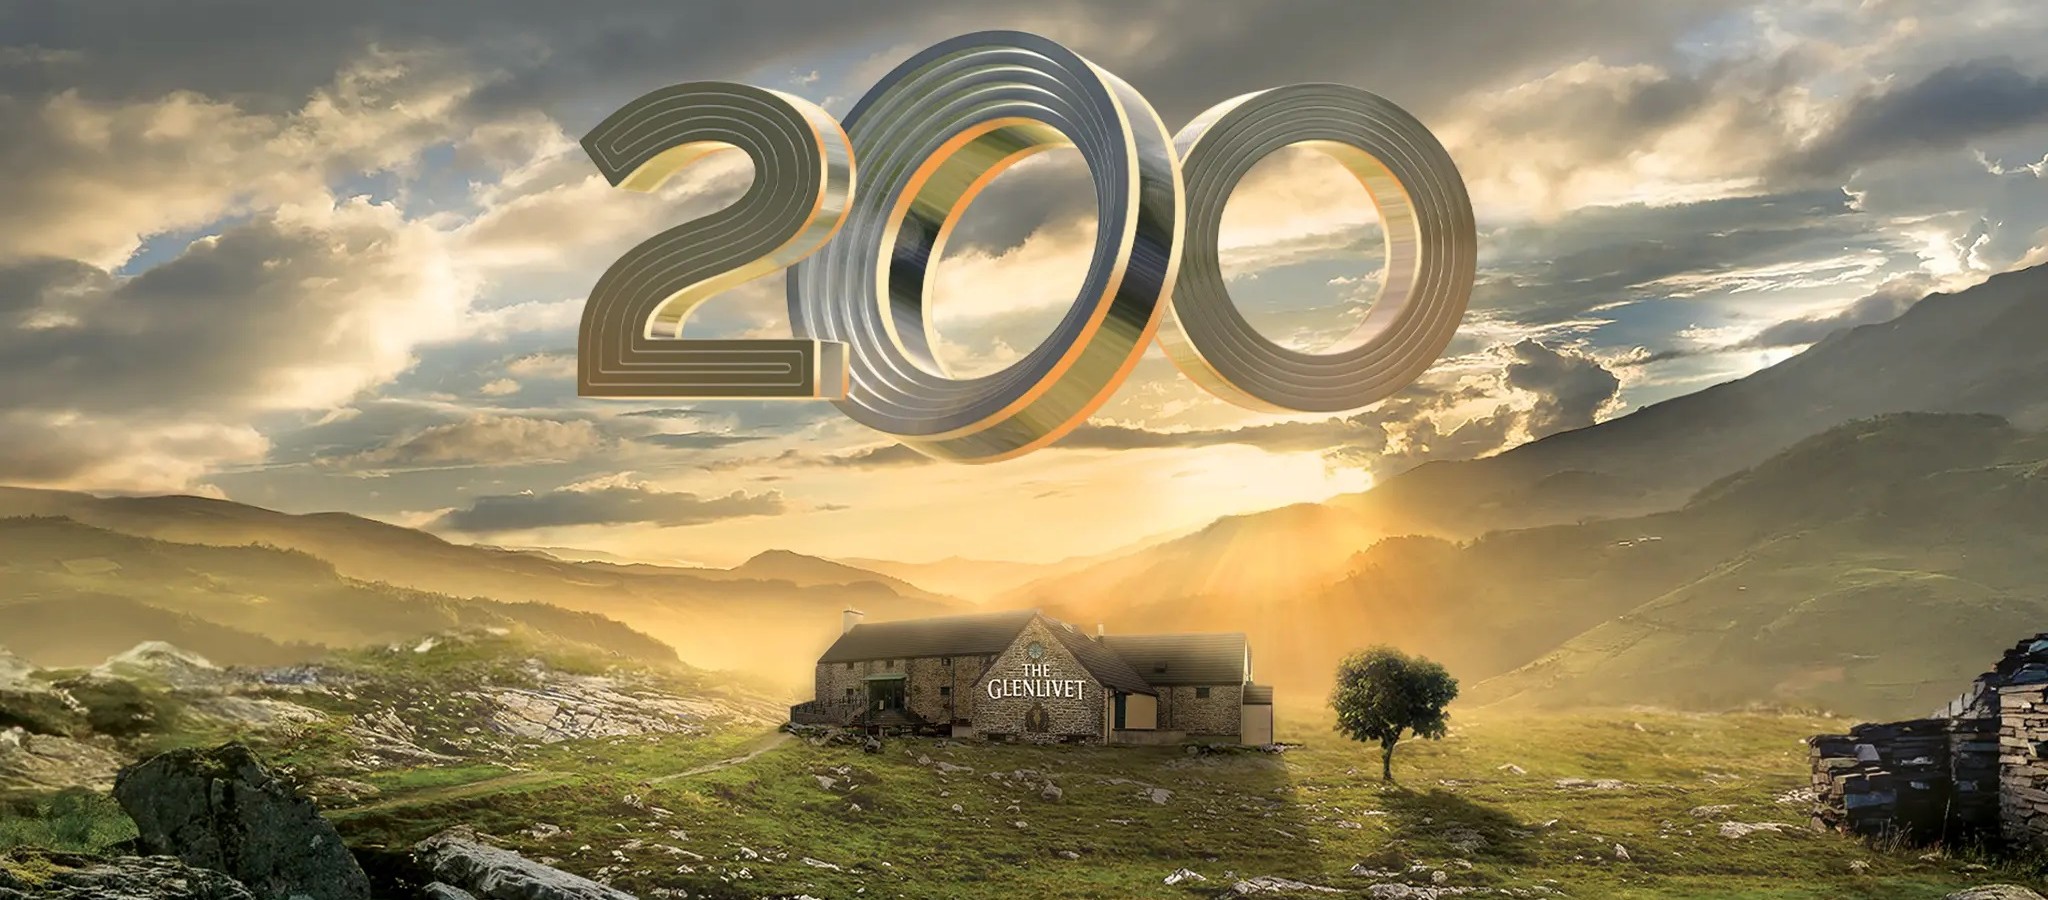 200 Years Old: A Scotch Whisky Icon Celebrates a Landmark Anniversary